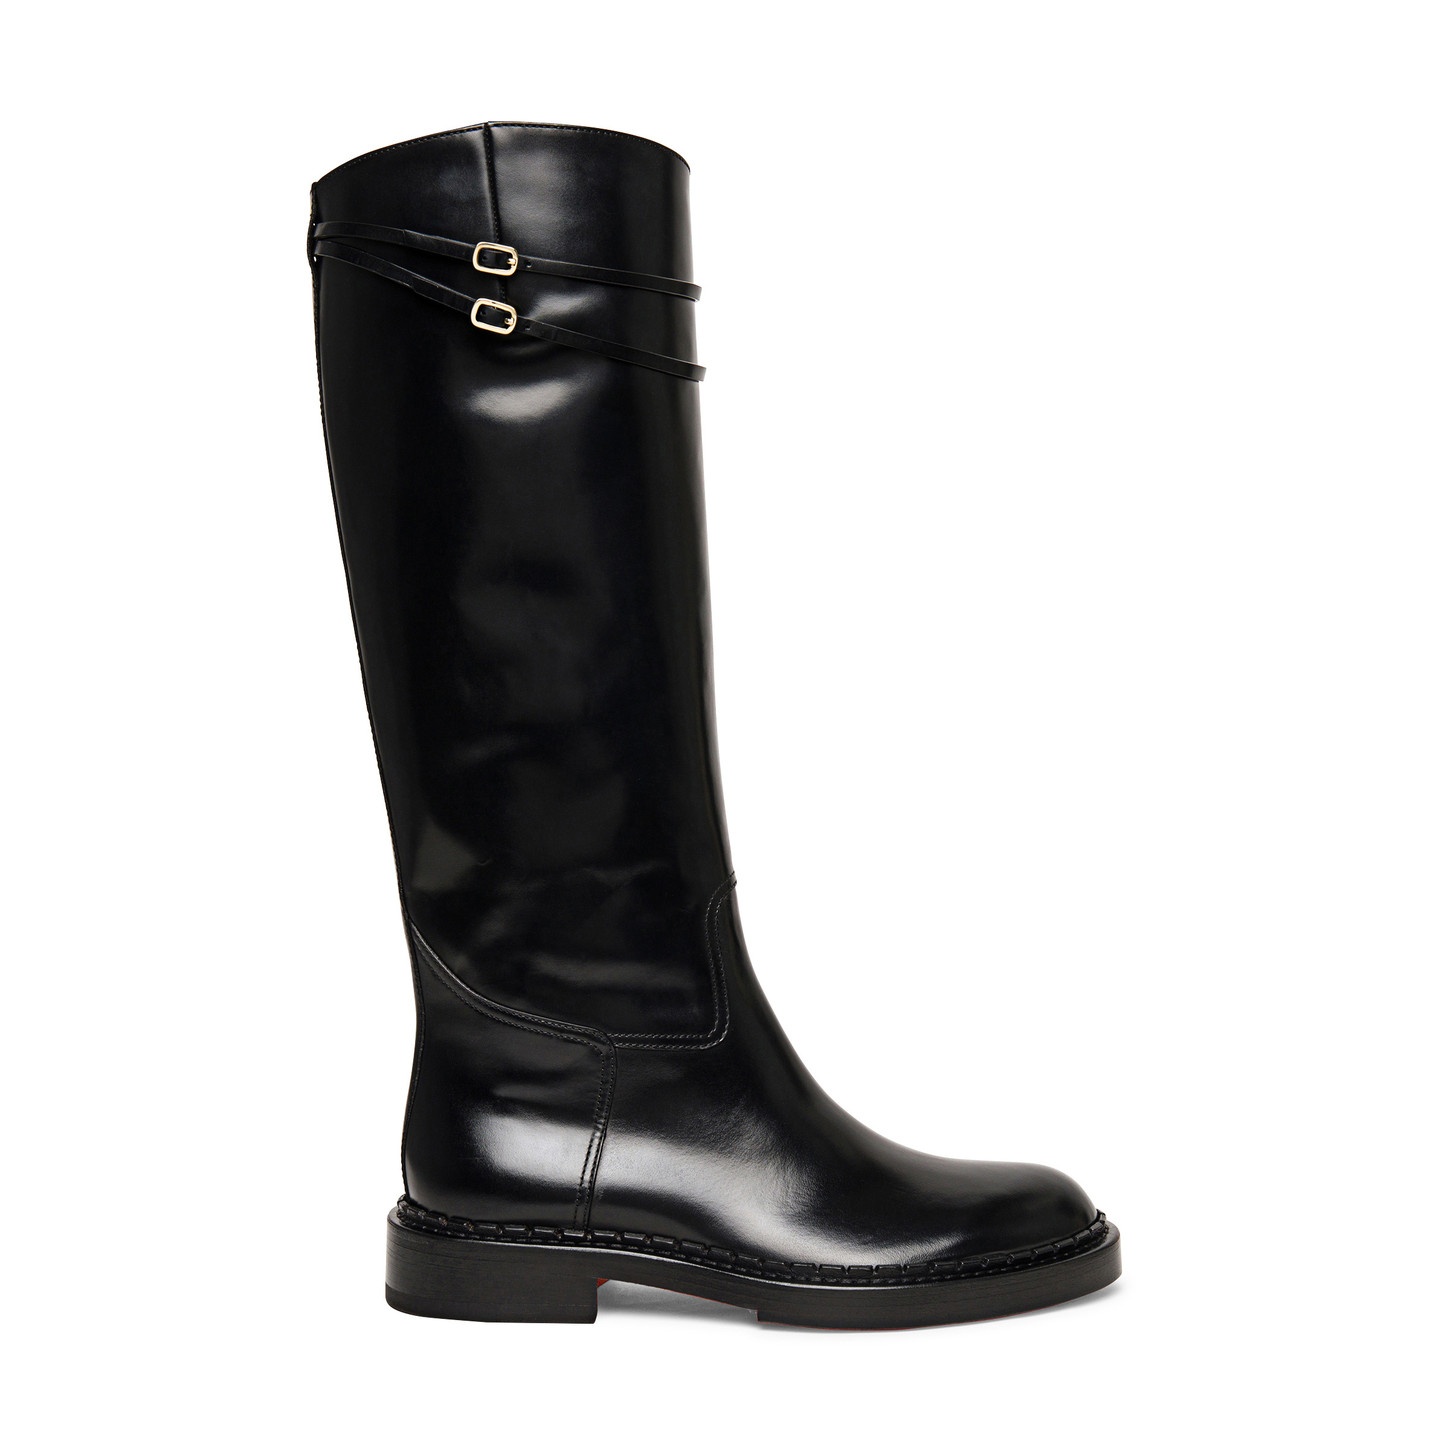 Women’s black leather boot - 1